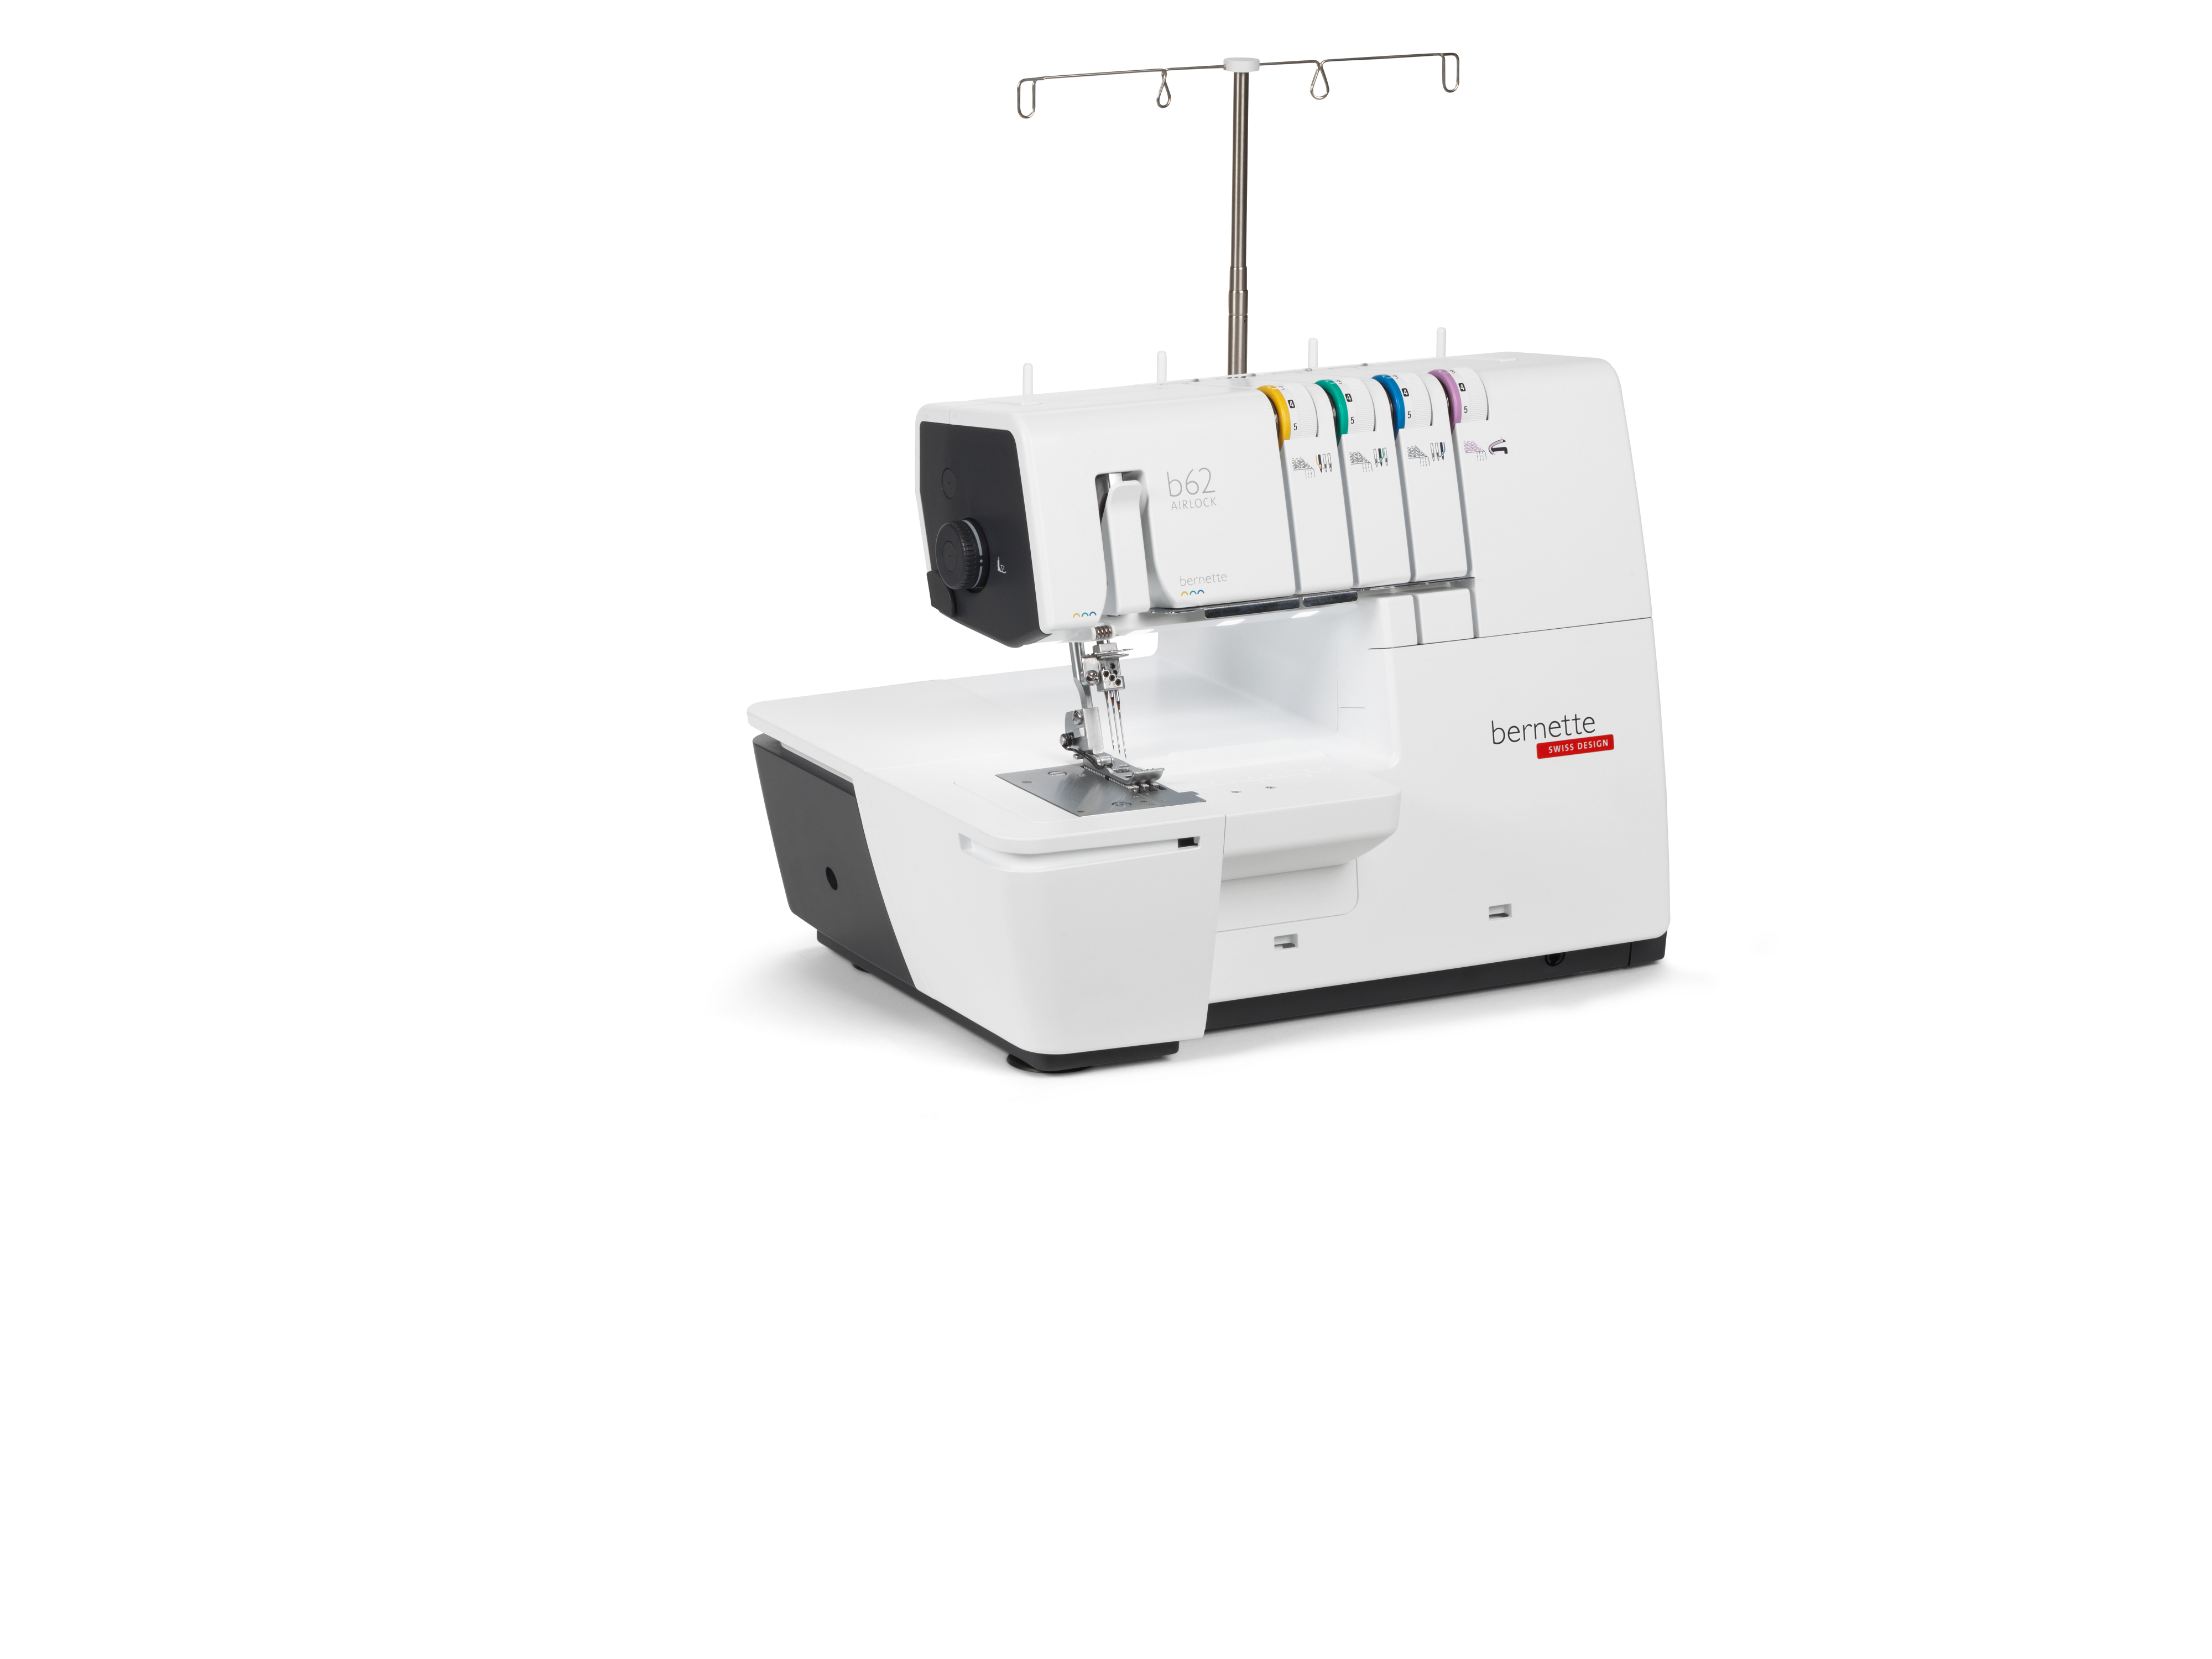 Bernette b62 AirLock Coverstitch Sewing Machine for Sale at World Weidner